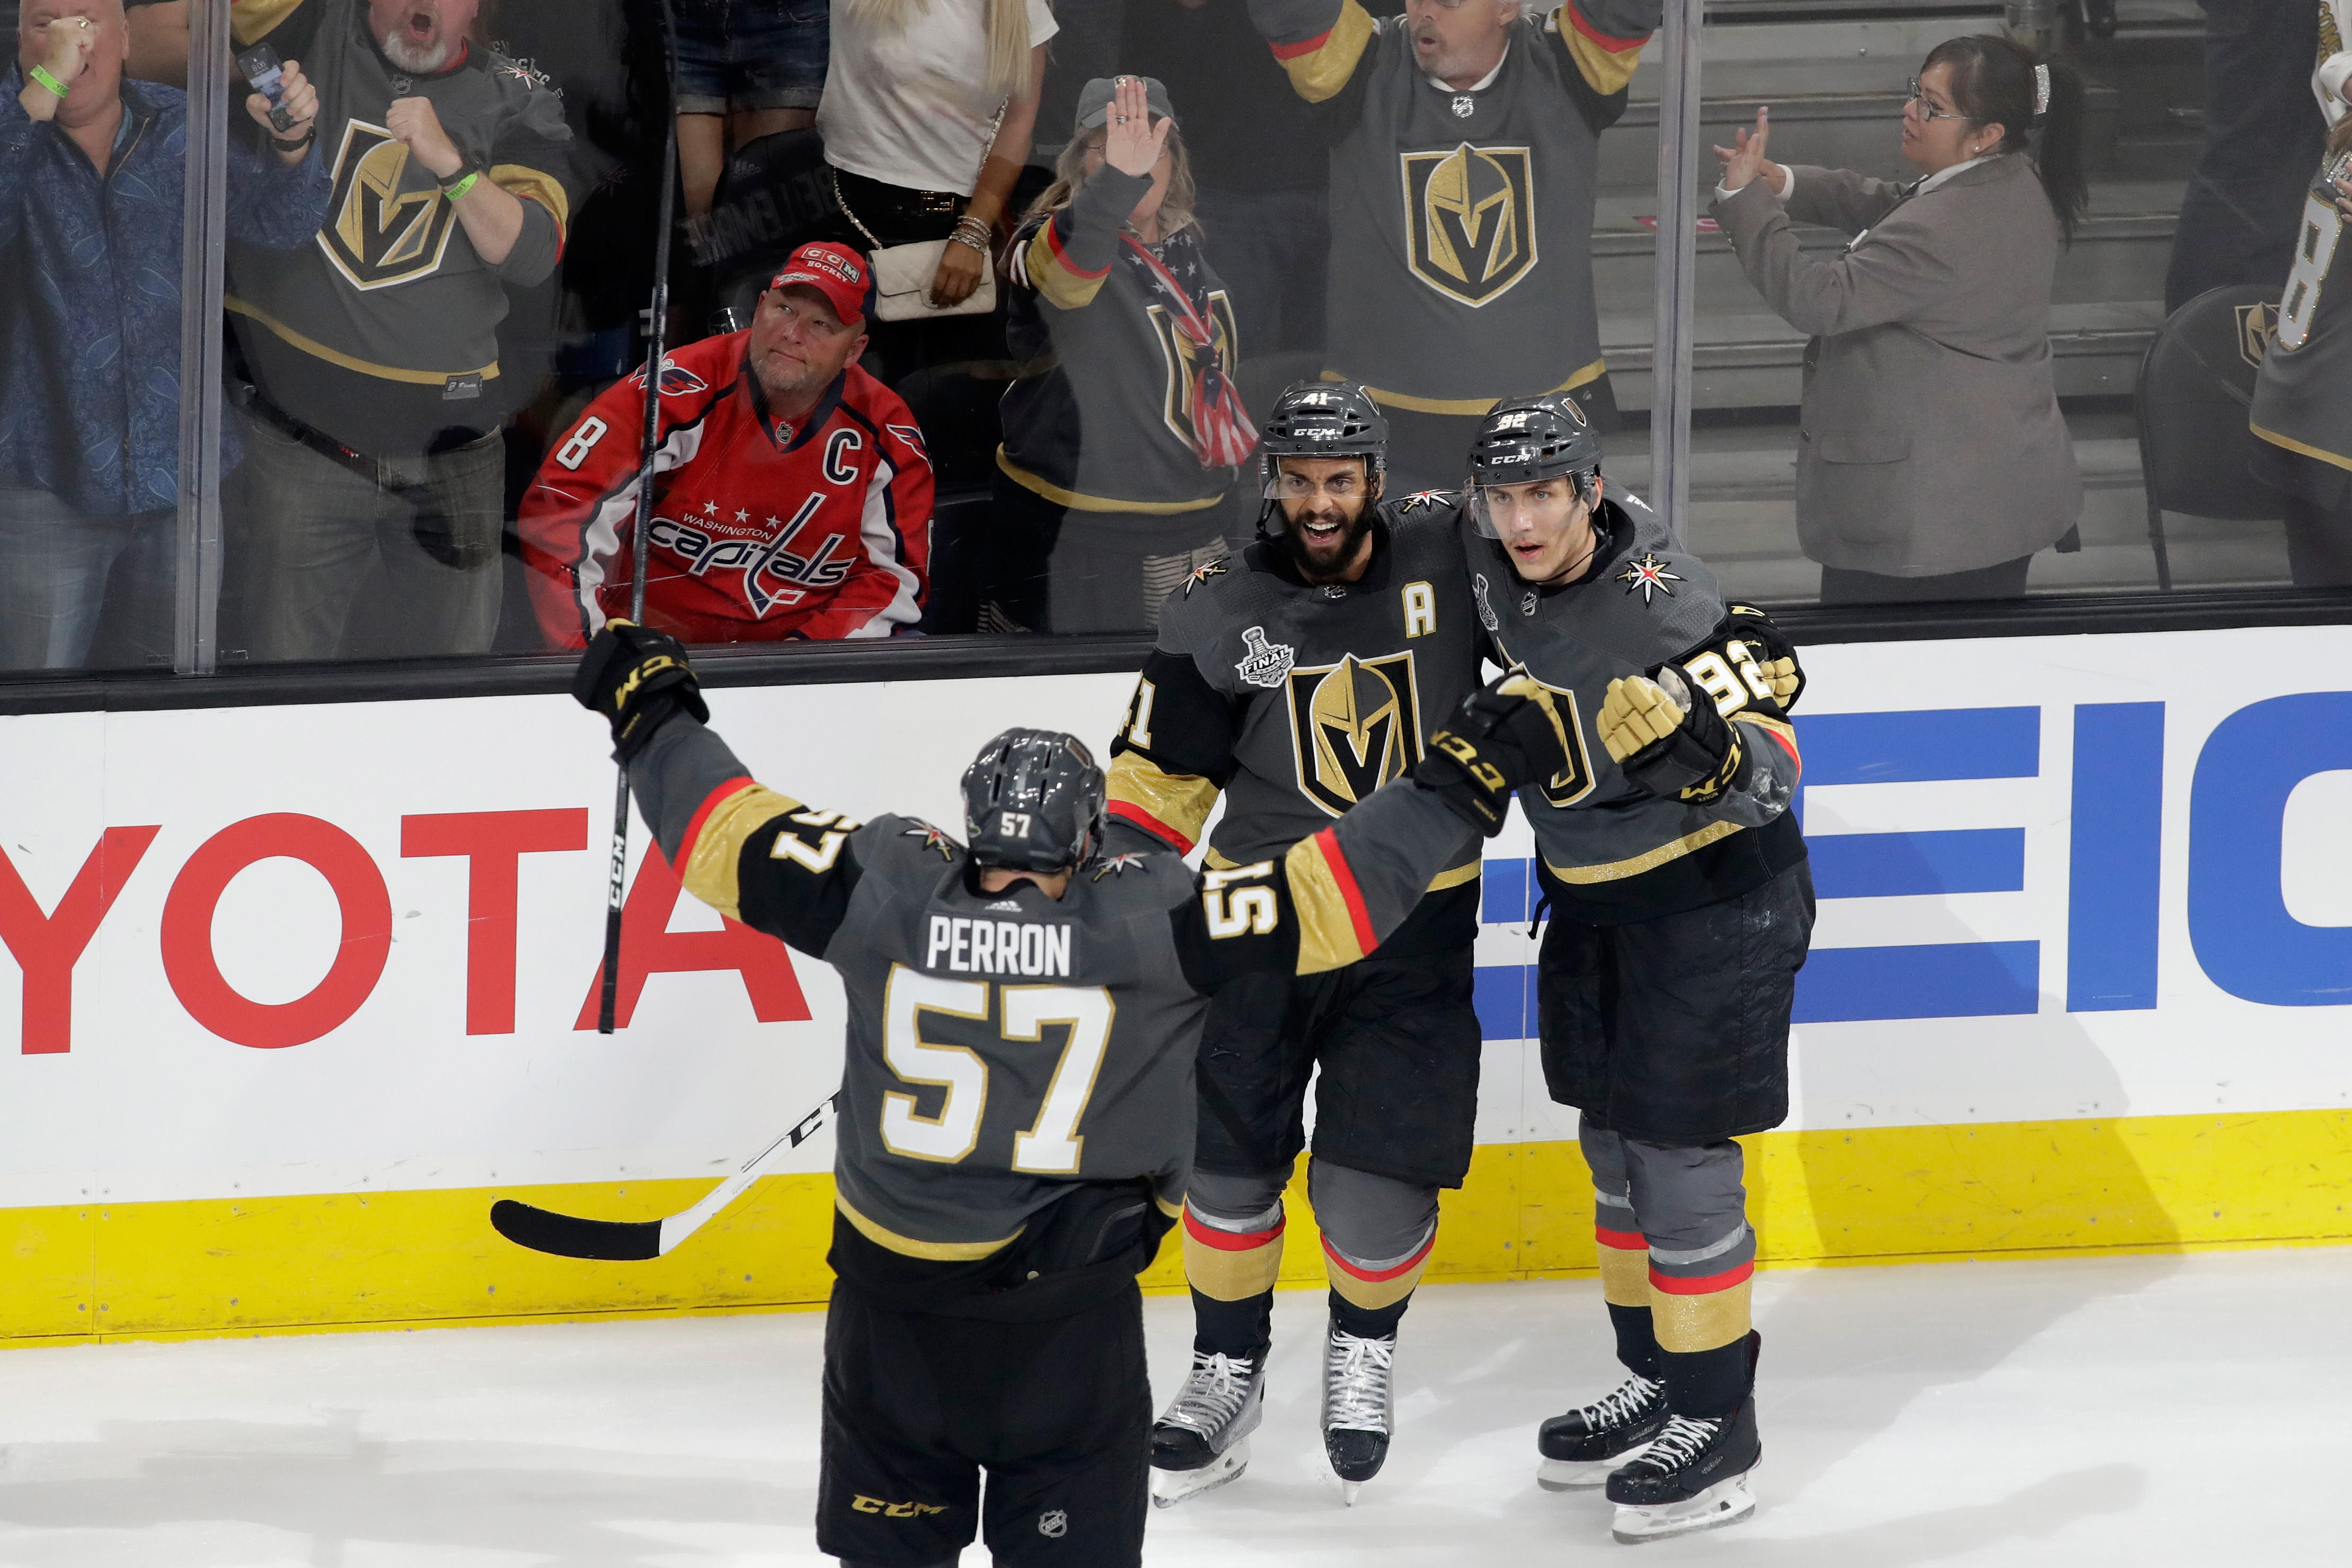 Golden Knights win Game 1 of Stanley Cup Finals - CBS News